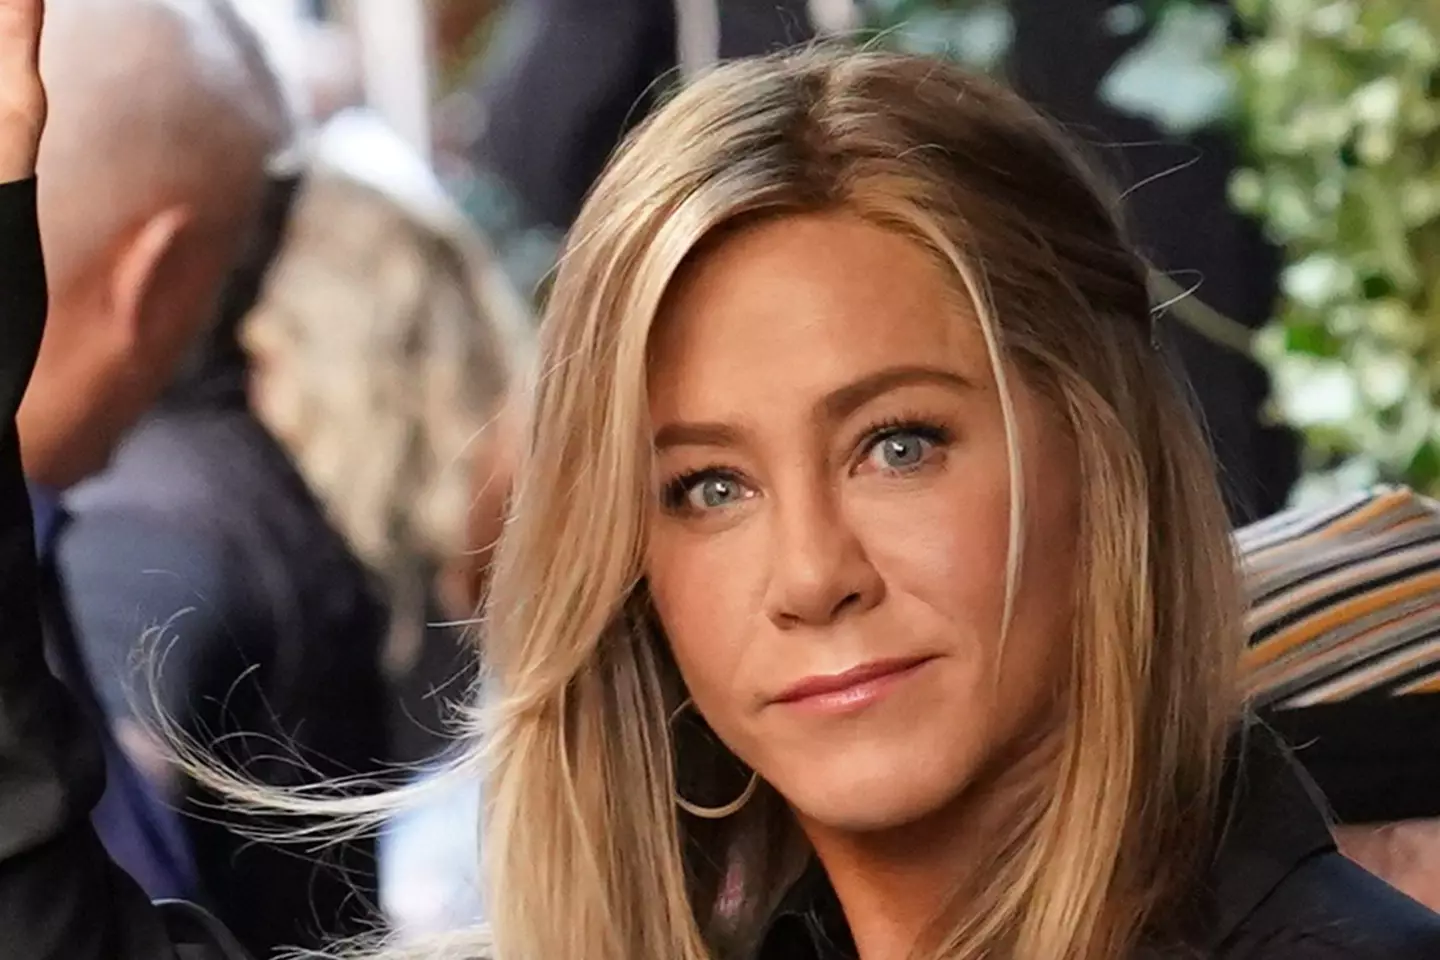 Jennifer Aniston says she ate pretty much the exact same meal every day.